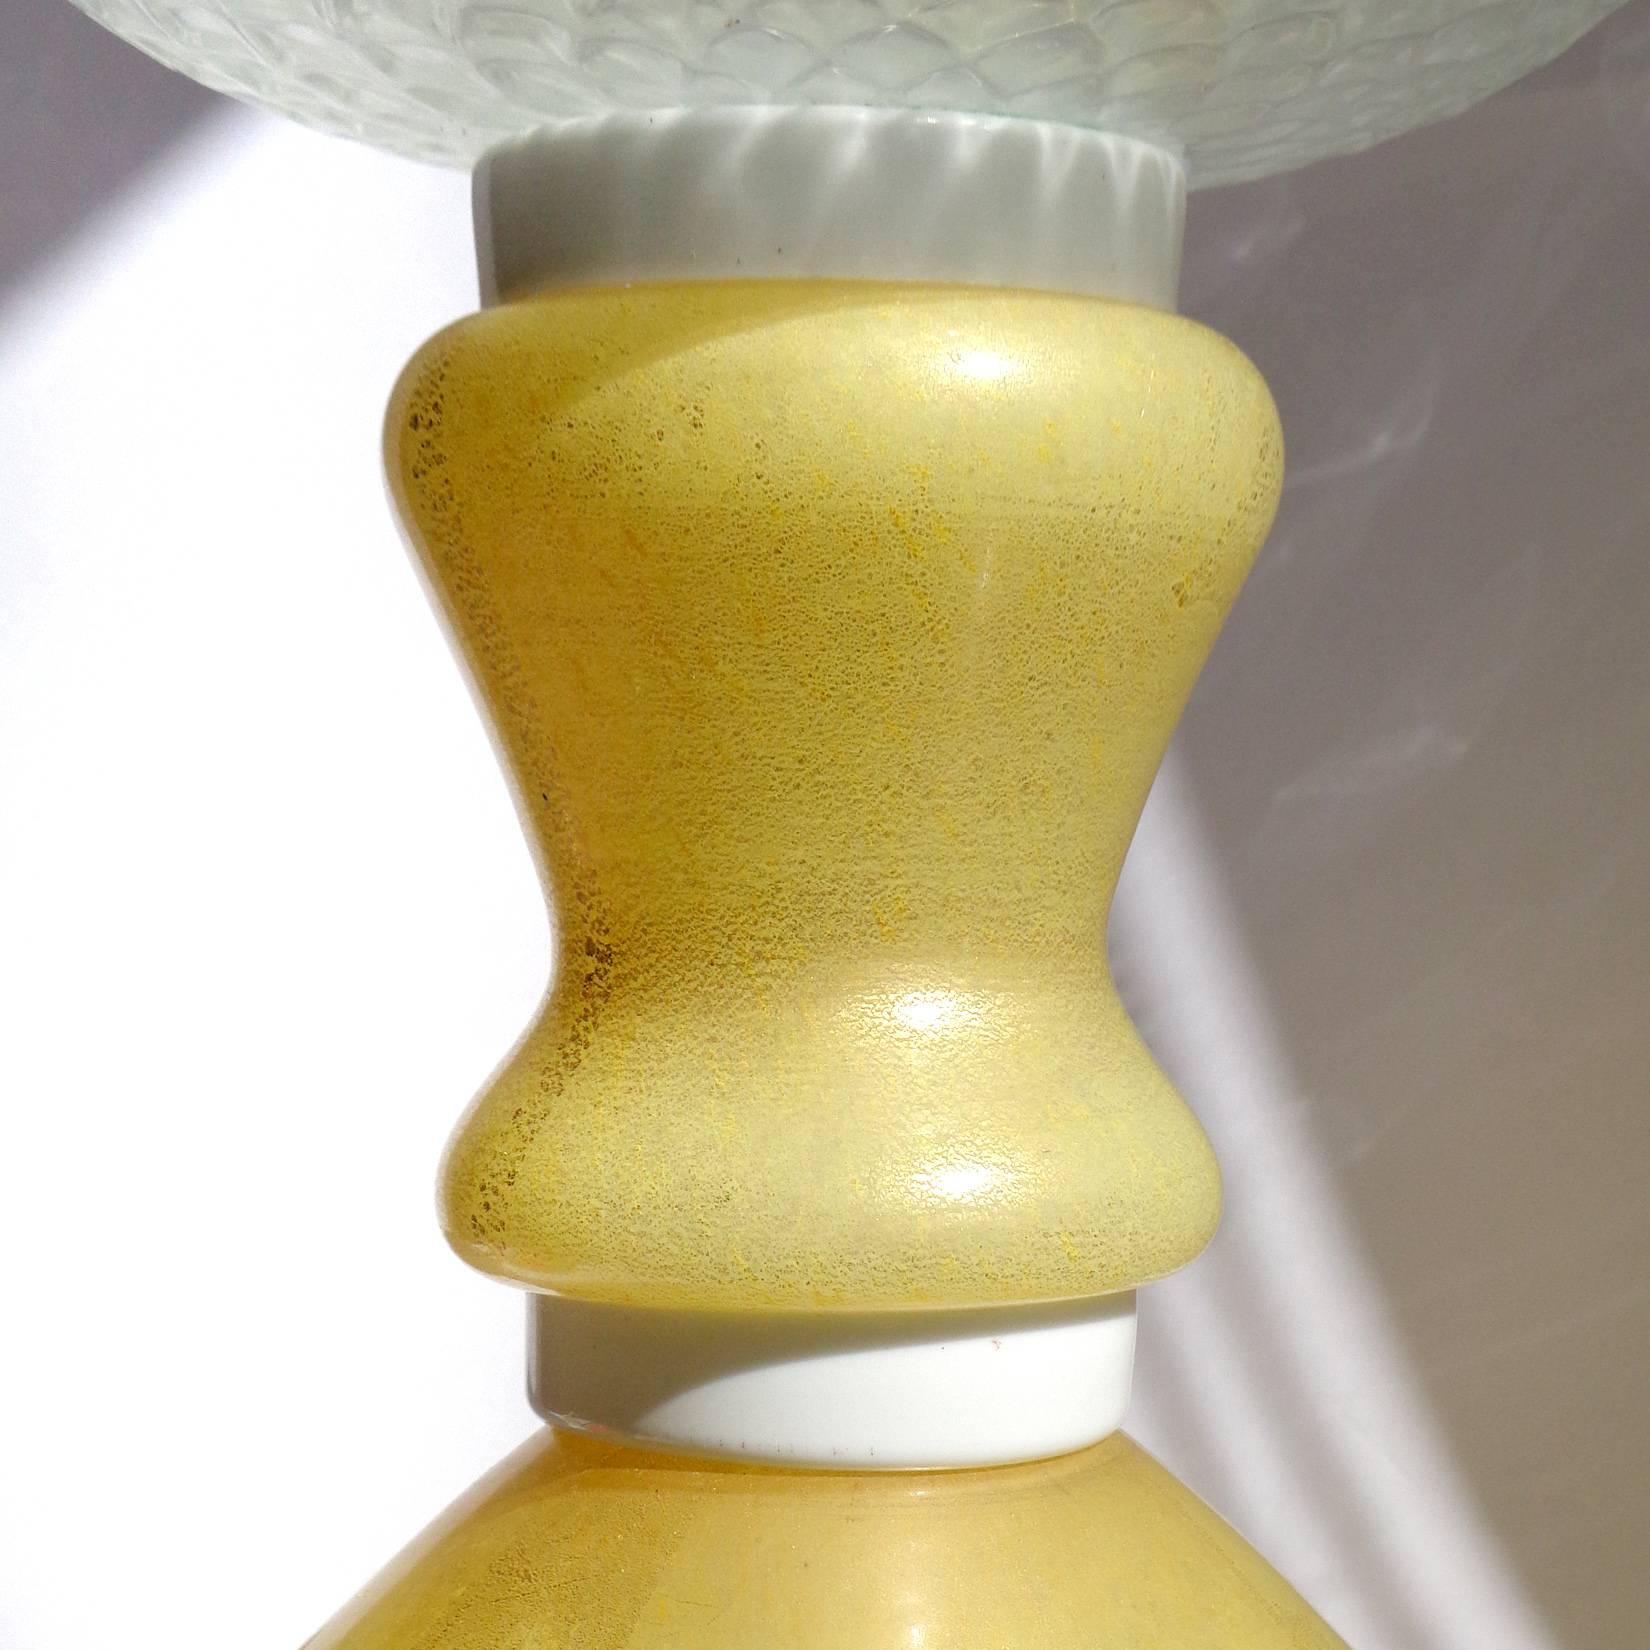 Incredible large antique Murano hand blown pasta white, yellow and gold flecks Italian art glass lamp with clear midsection and chimney top. Attributed to the Barovier e Toso company. The shade has a paneled effect and diamond quilt design on the